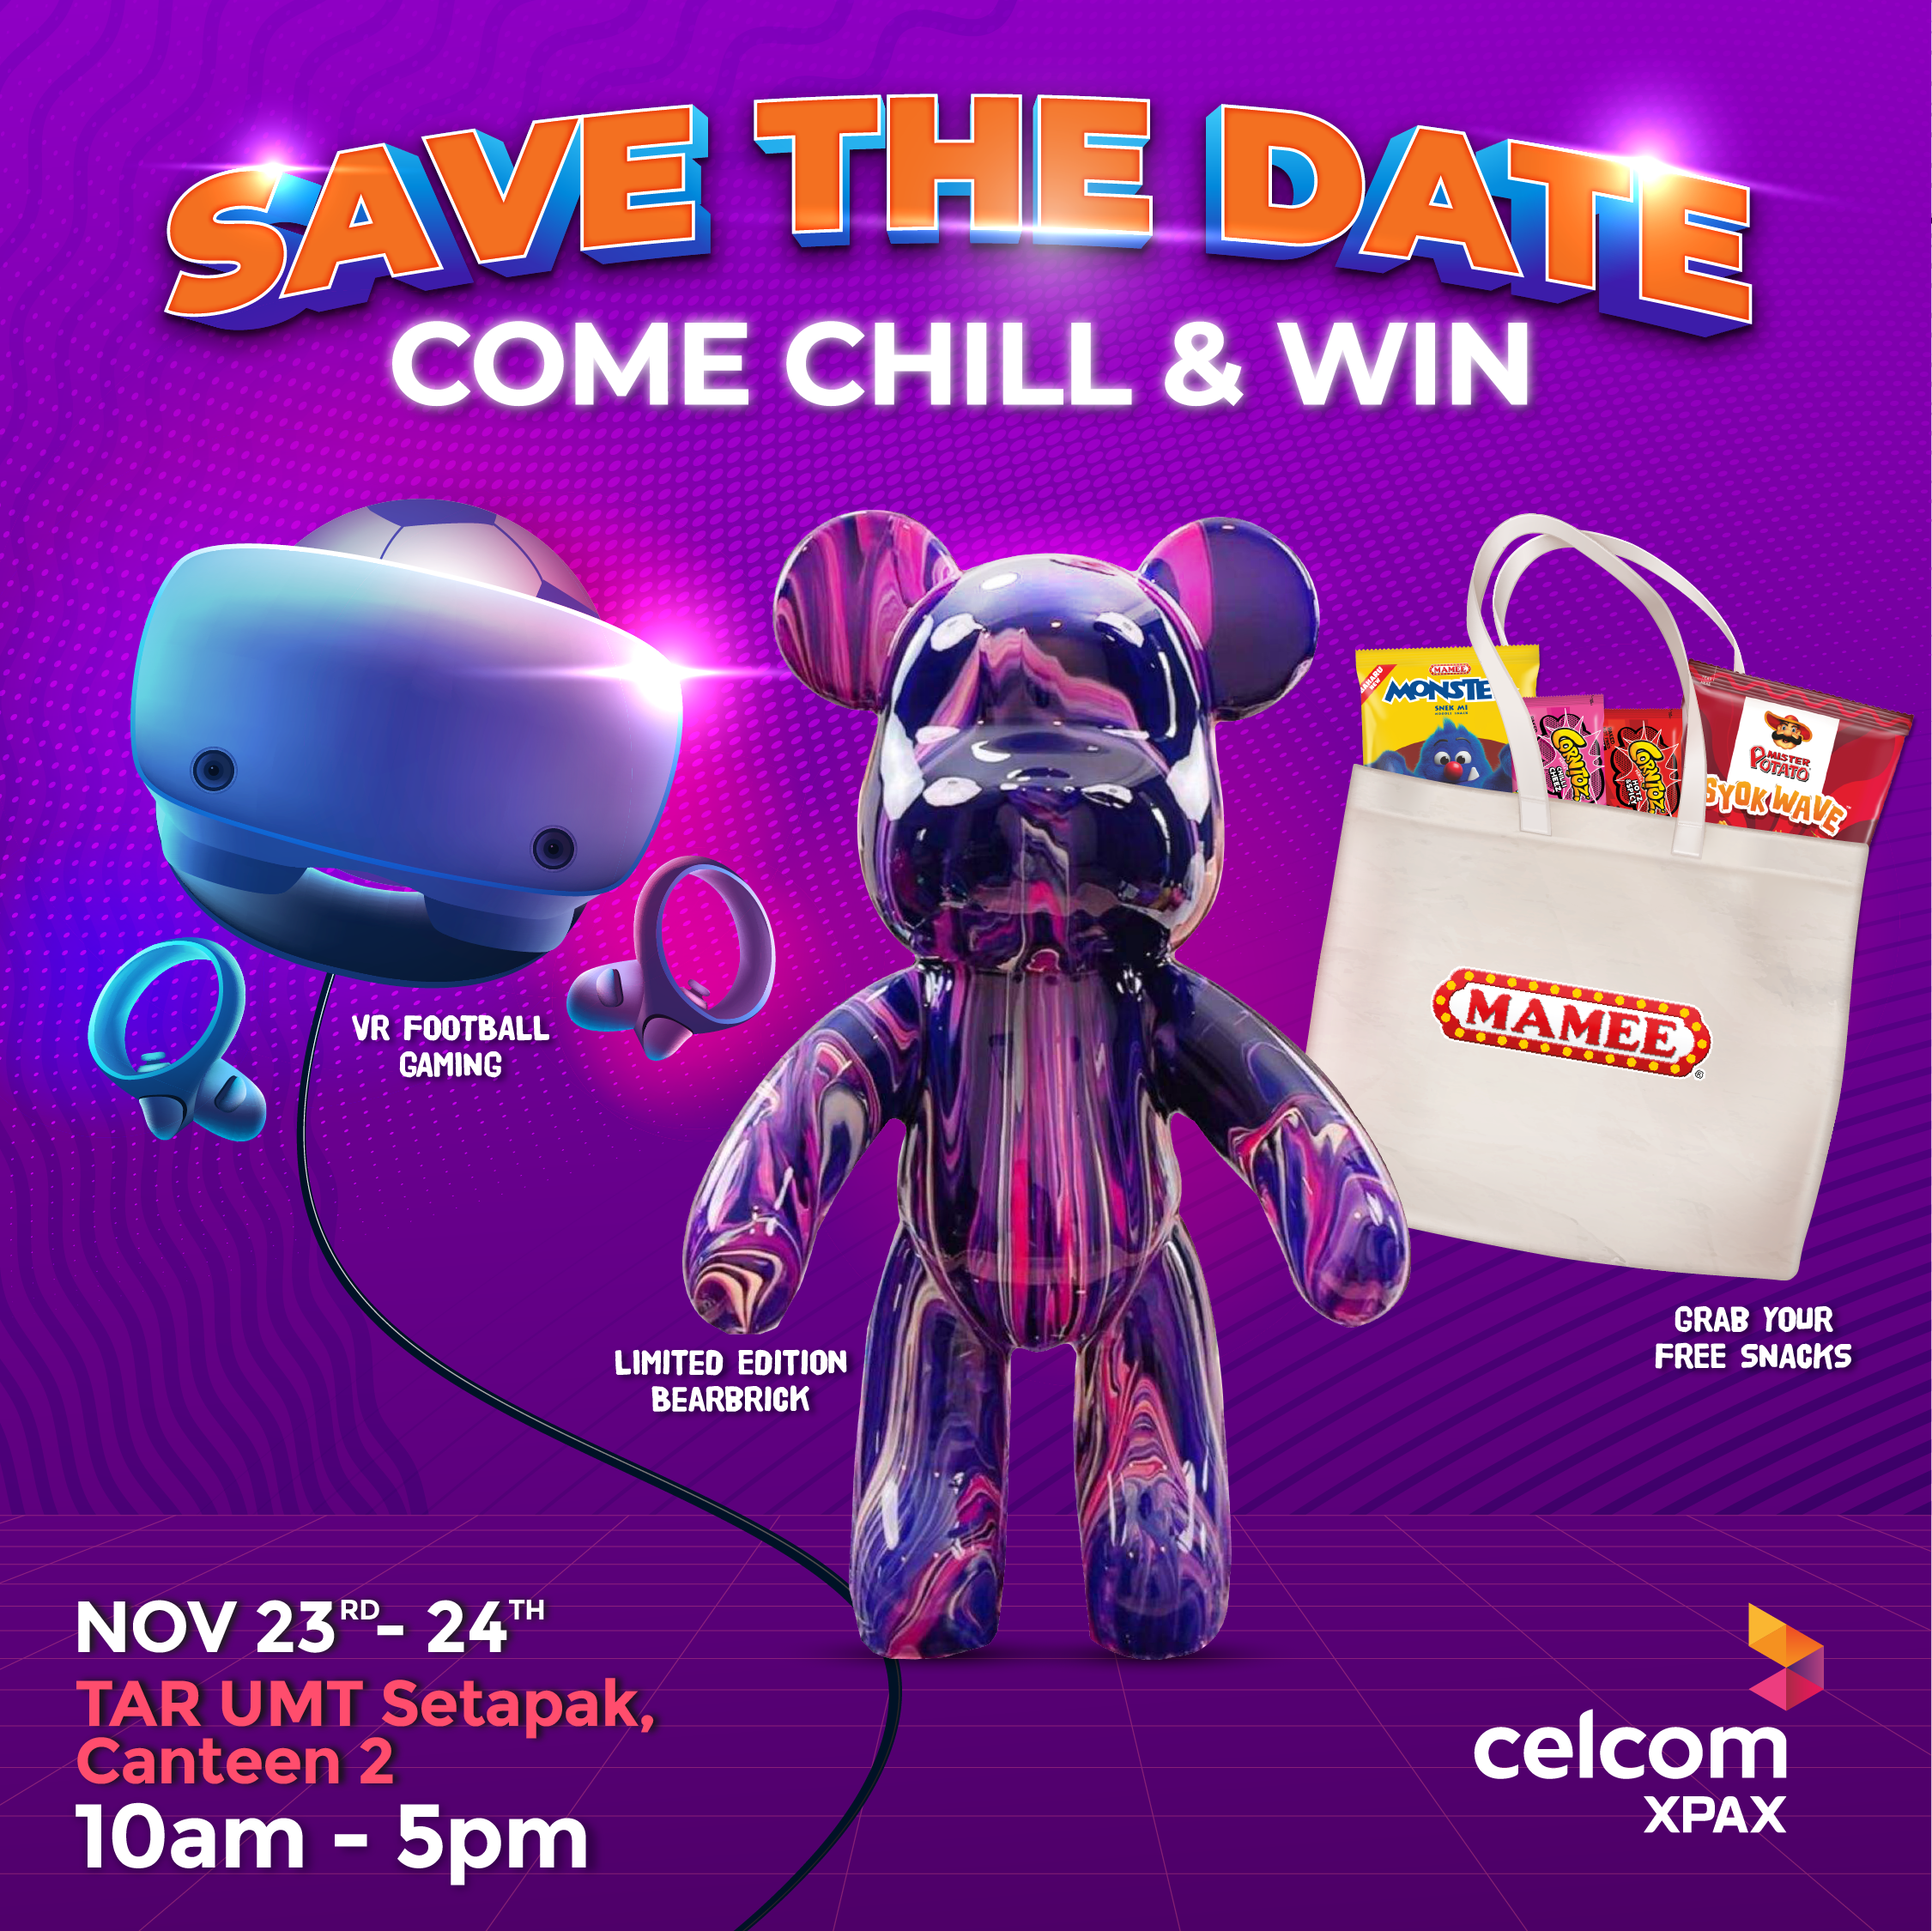 Are you ready to Mix & Match with Celcom? Come check out their booth!